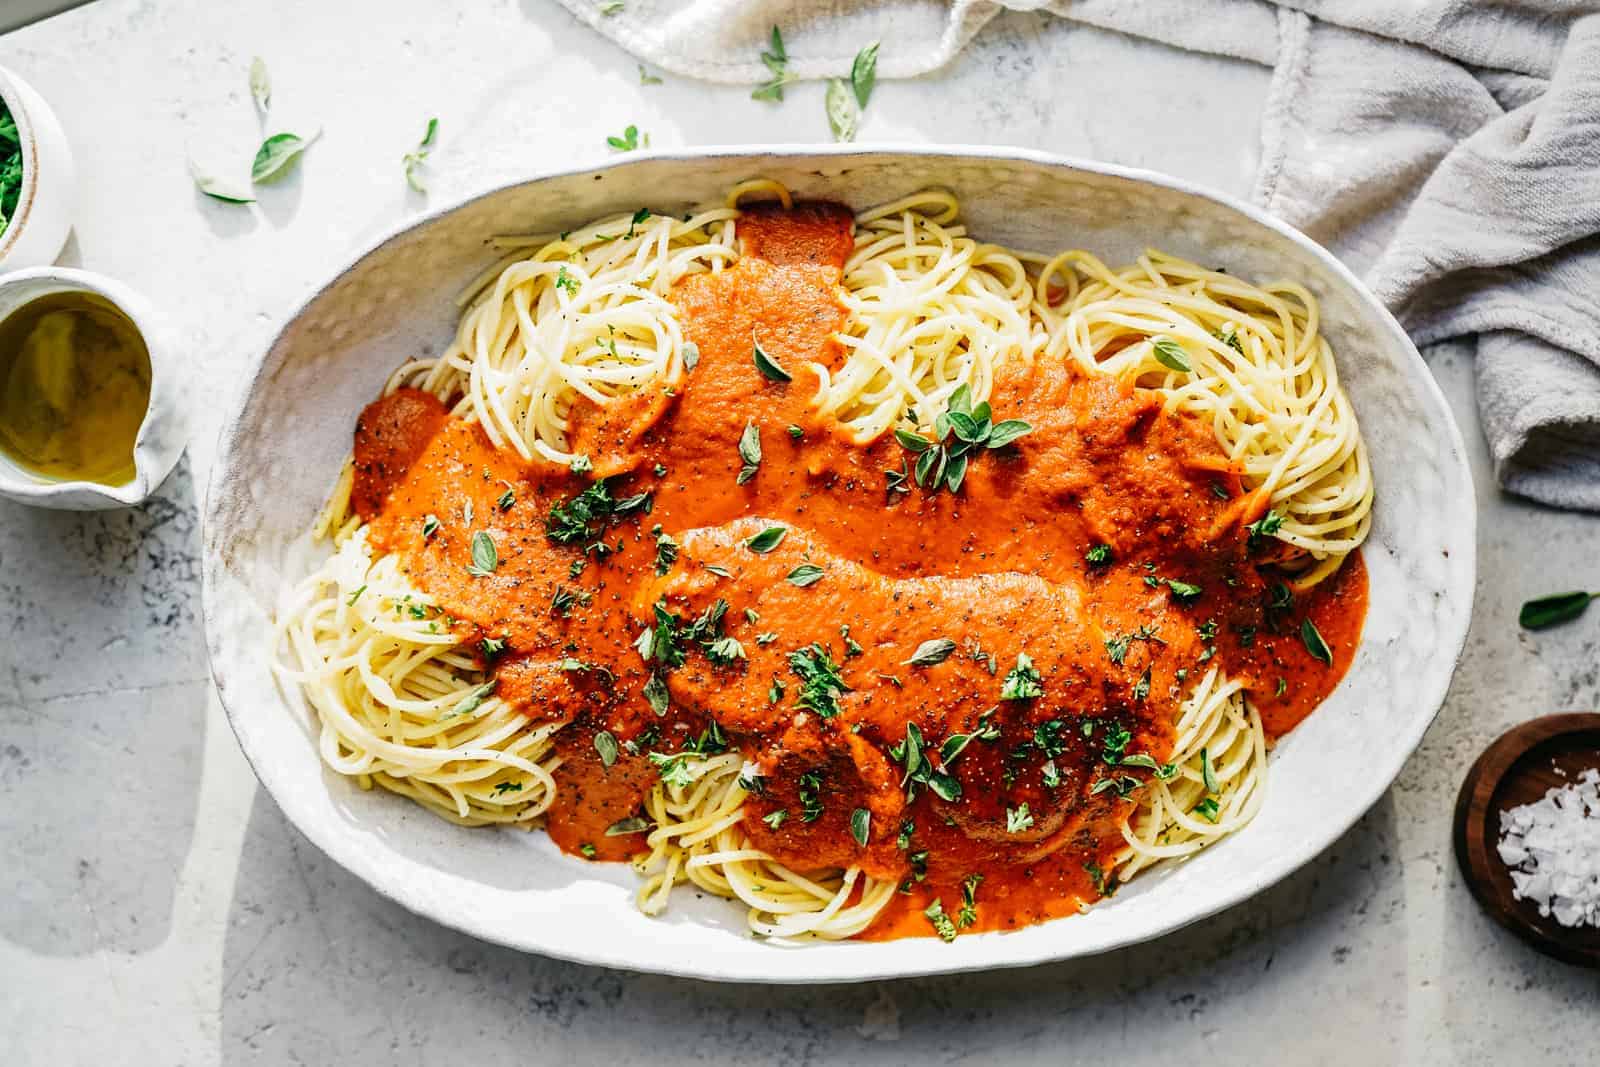 Food photography tricks that will help you ace food photos like this vegan spaghetti sauce in a big serving bowl.